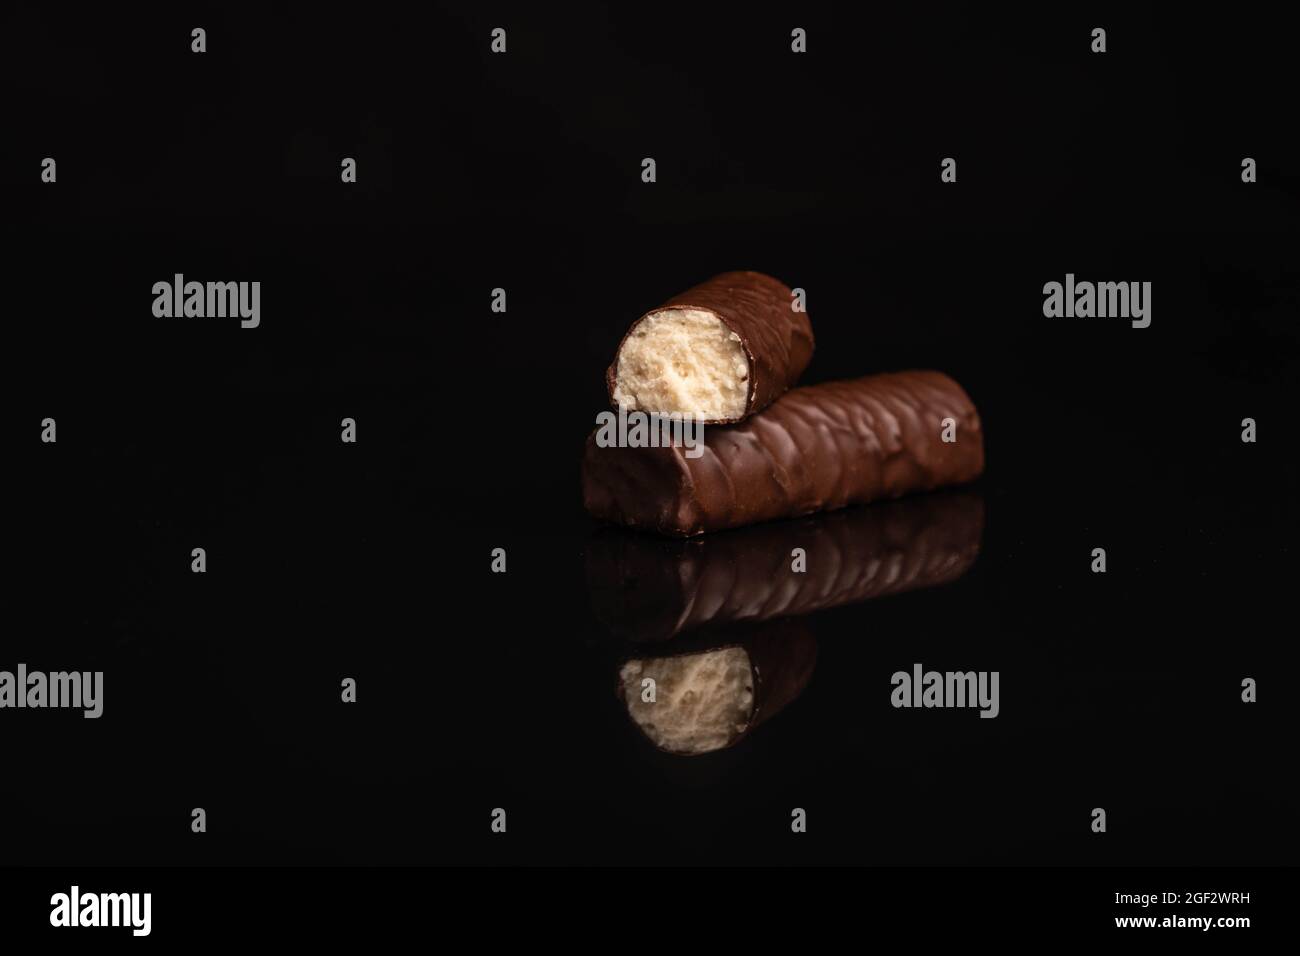 Chocolate candy on a dark background Stock Photo